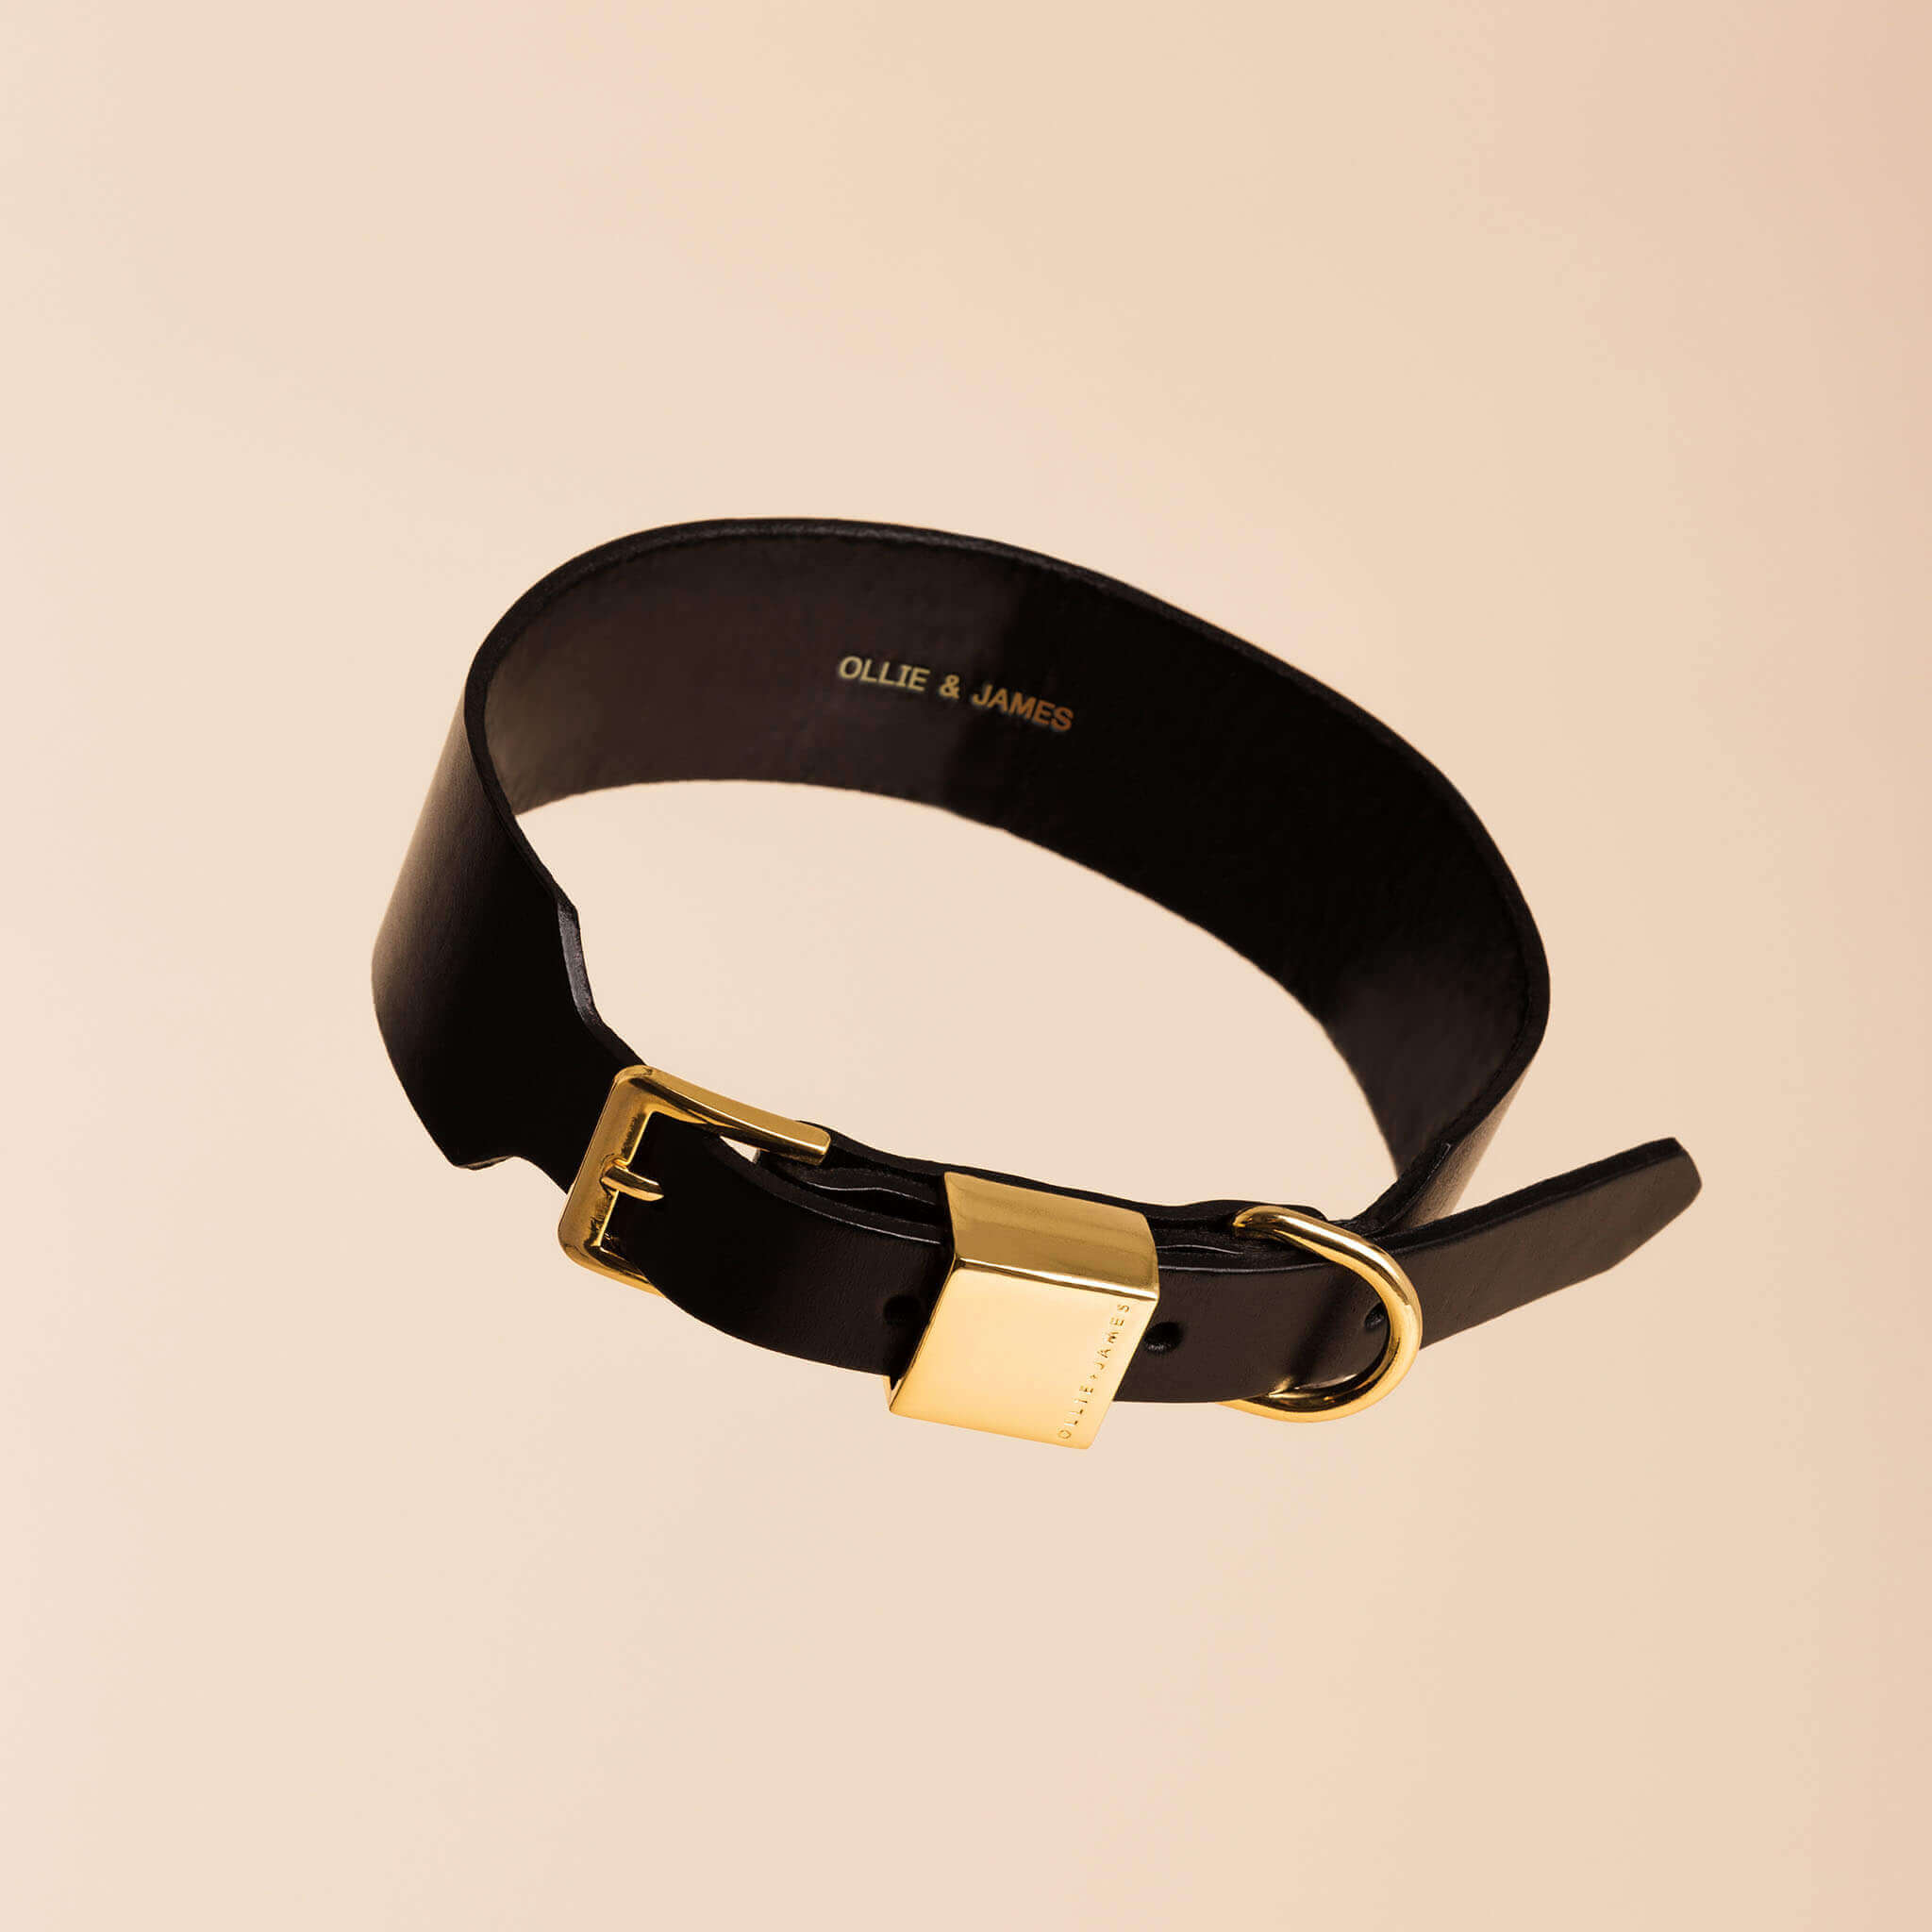 Luxury leather dog collar in sable black.